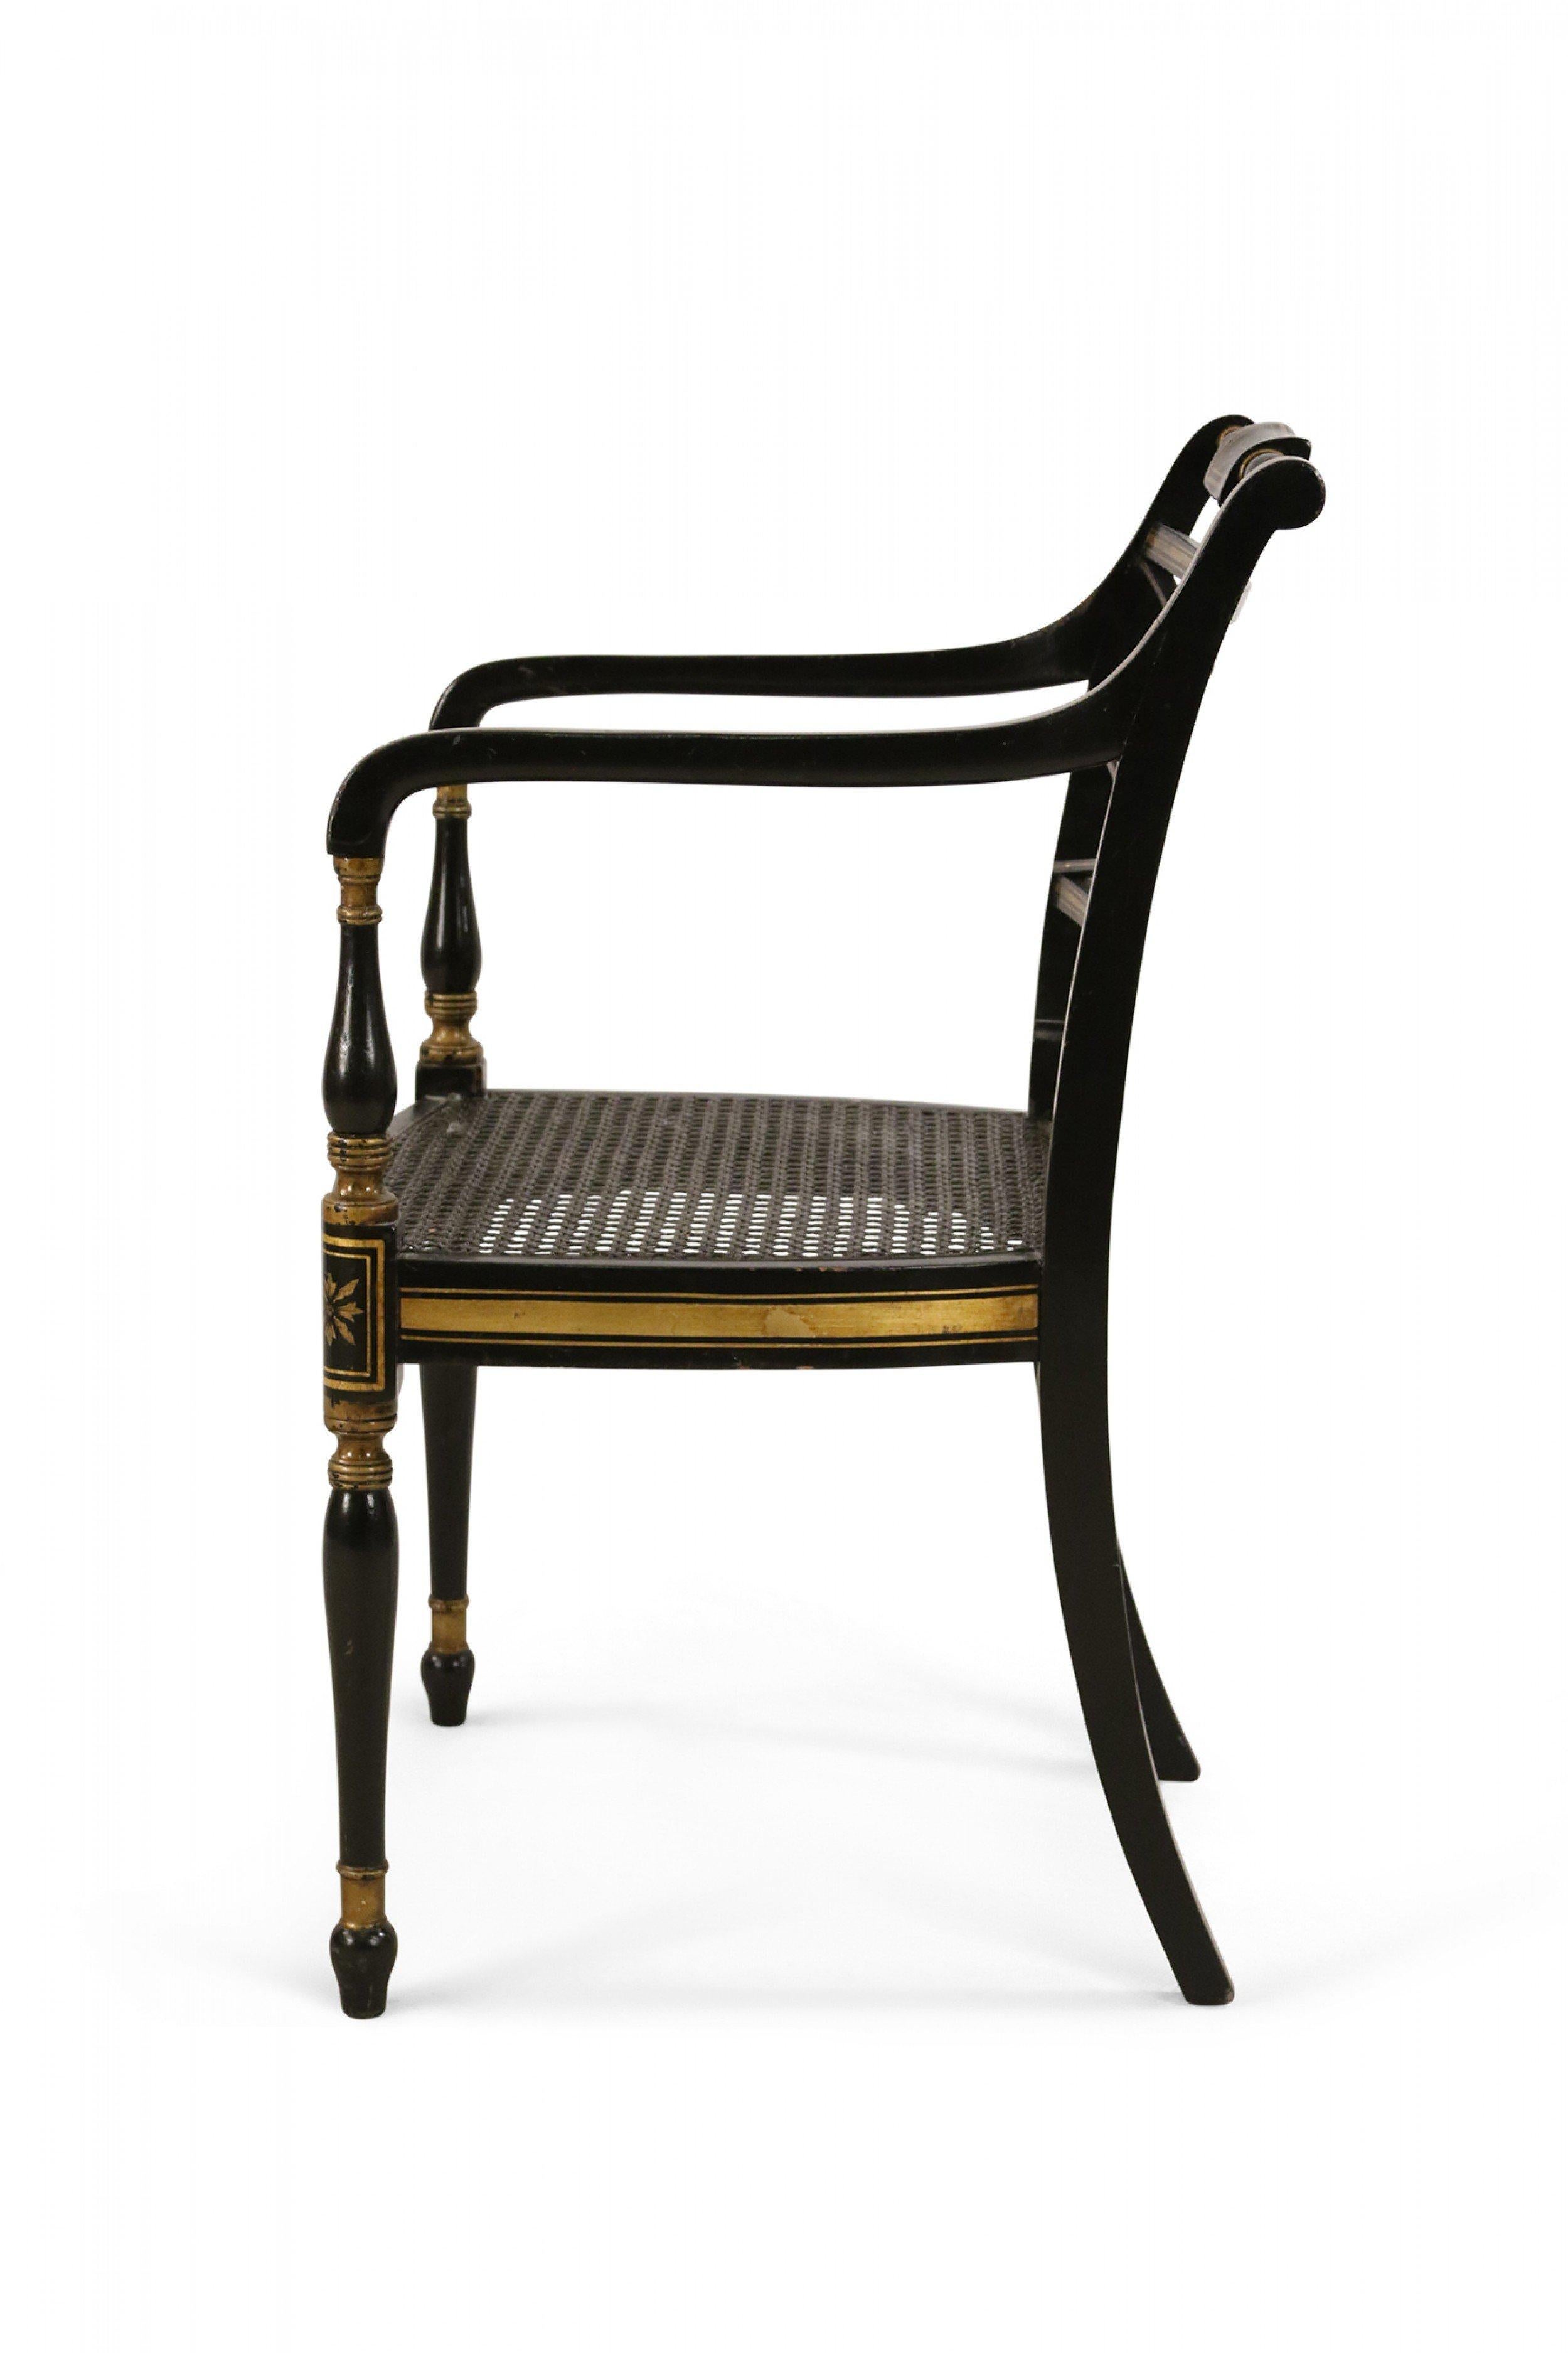 20th Century English Regency Style Black and Gold Painted Cane Seat Side Chair For Sale